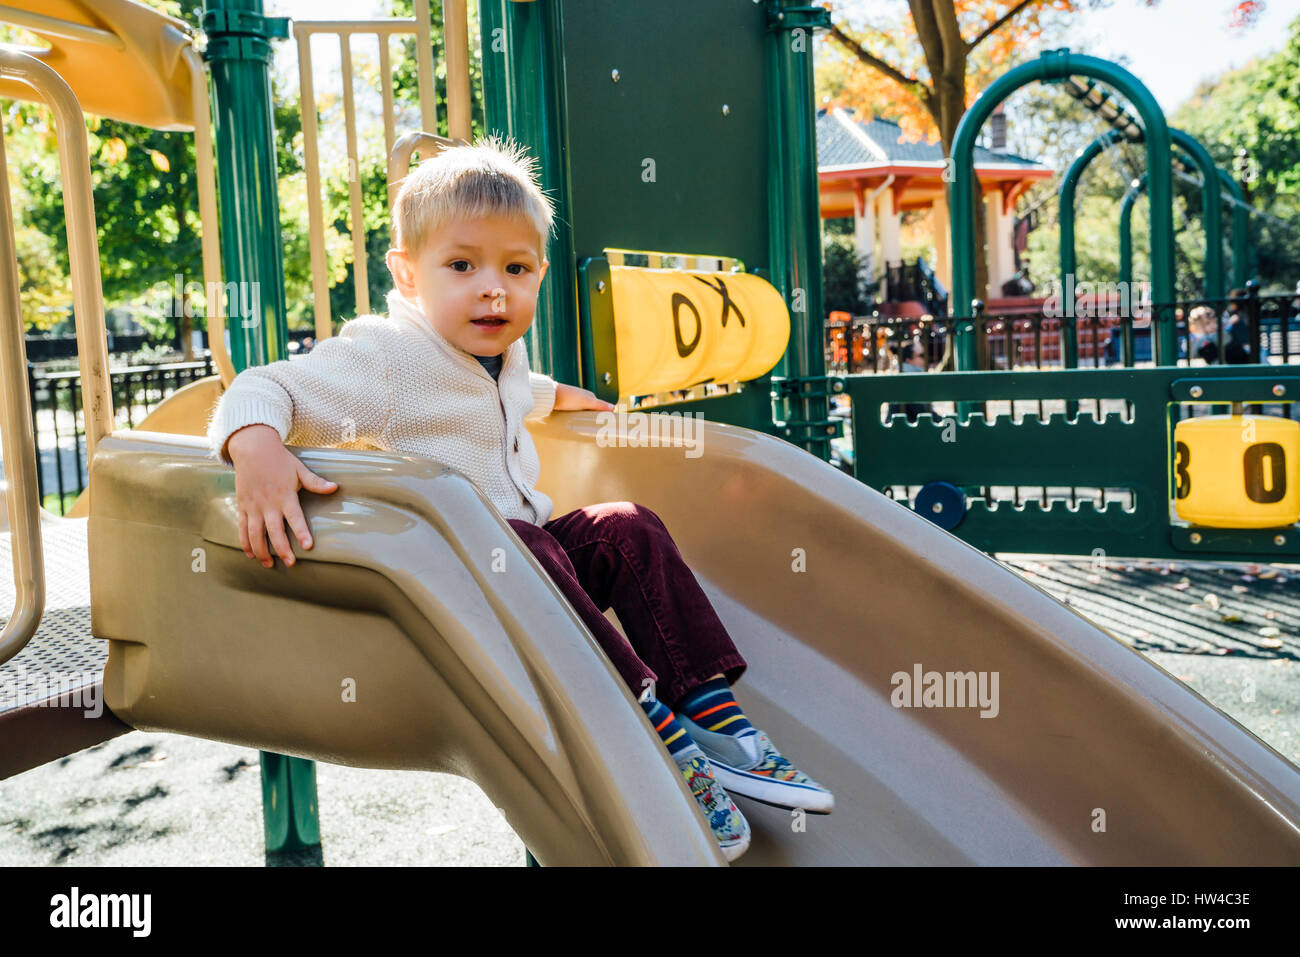 Portrait of young woman sitting on playground slide Banque D'Images